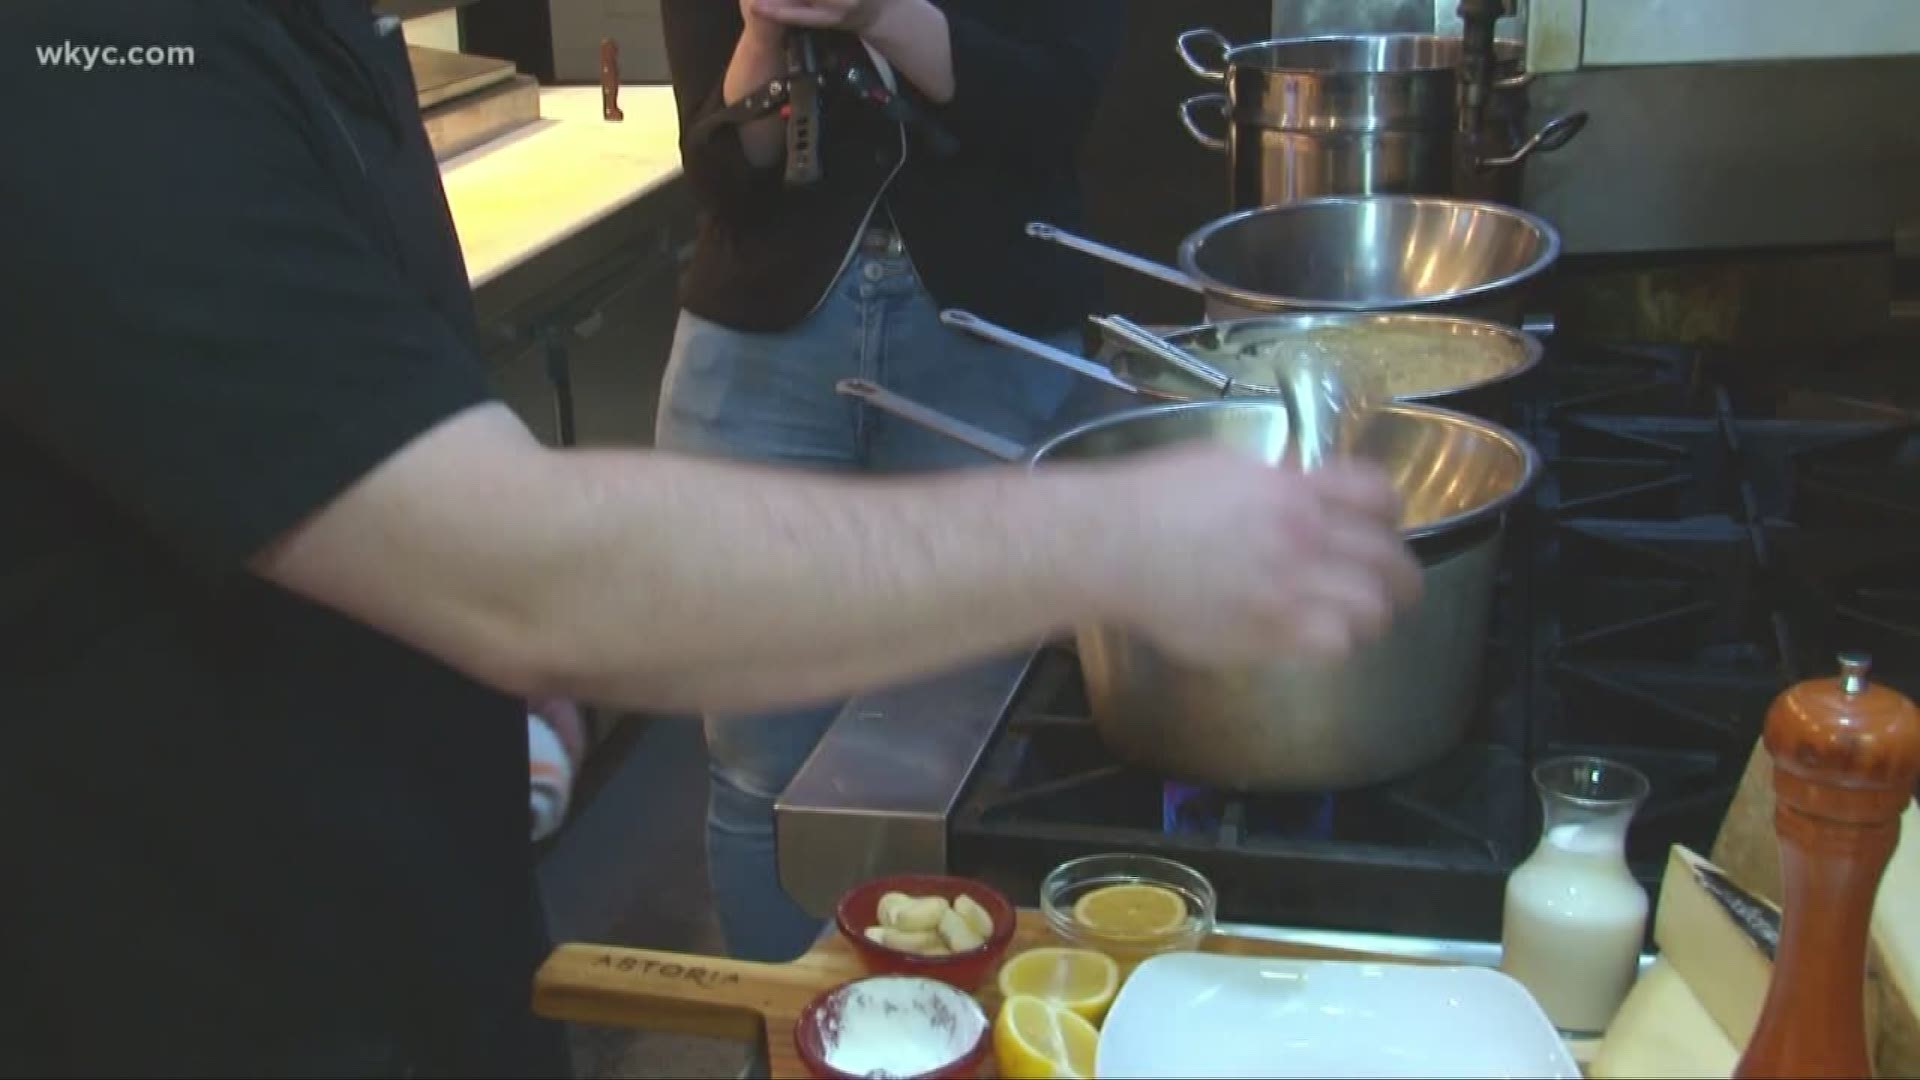 3News' food expert Doug Trattner is in the kitchen at Astoria cafe and market to show us how to make two different fondues and which wines to pair them with.